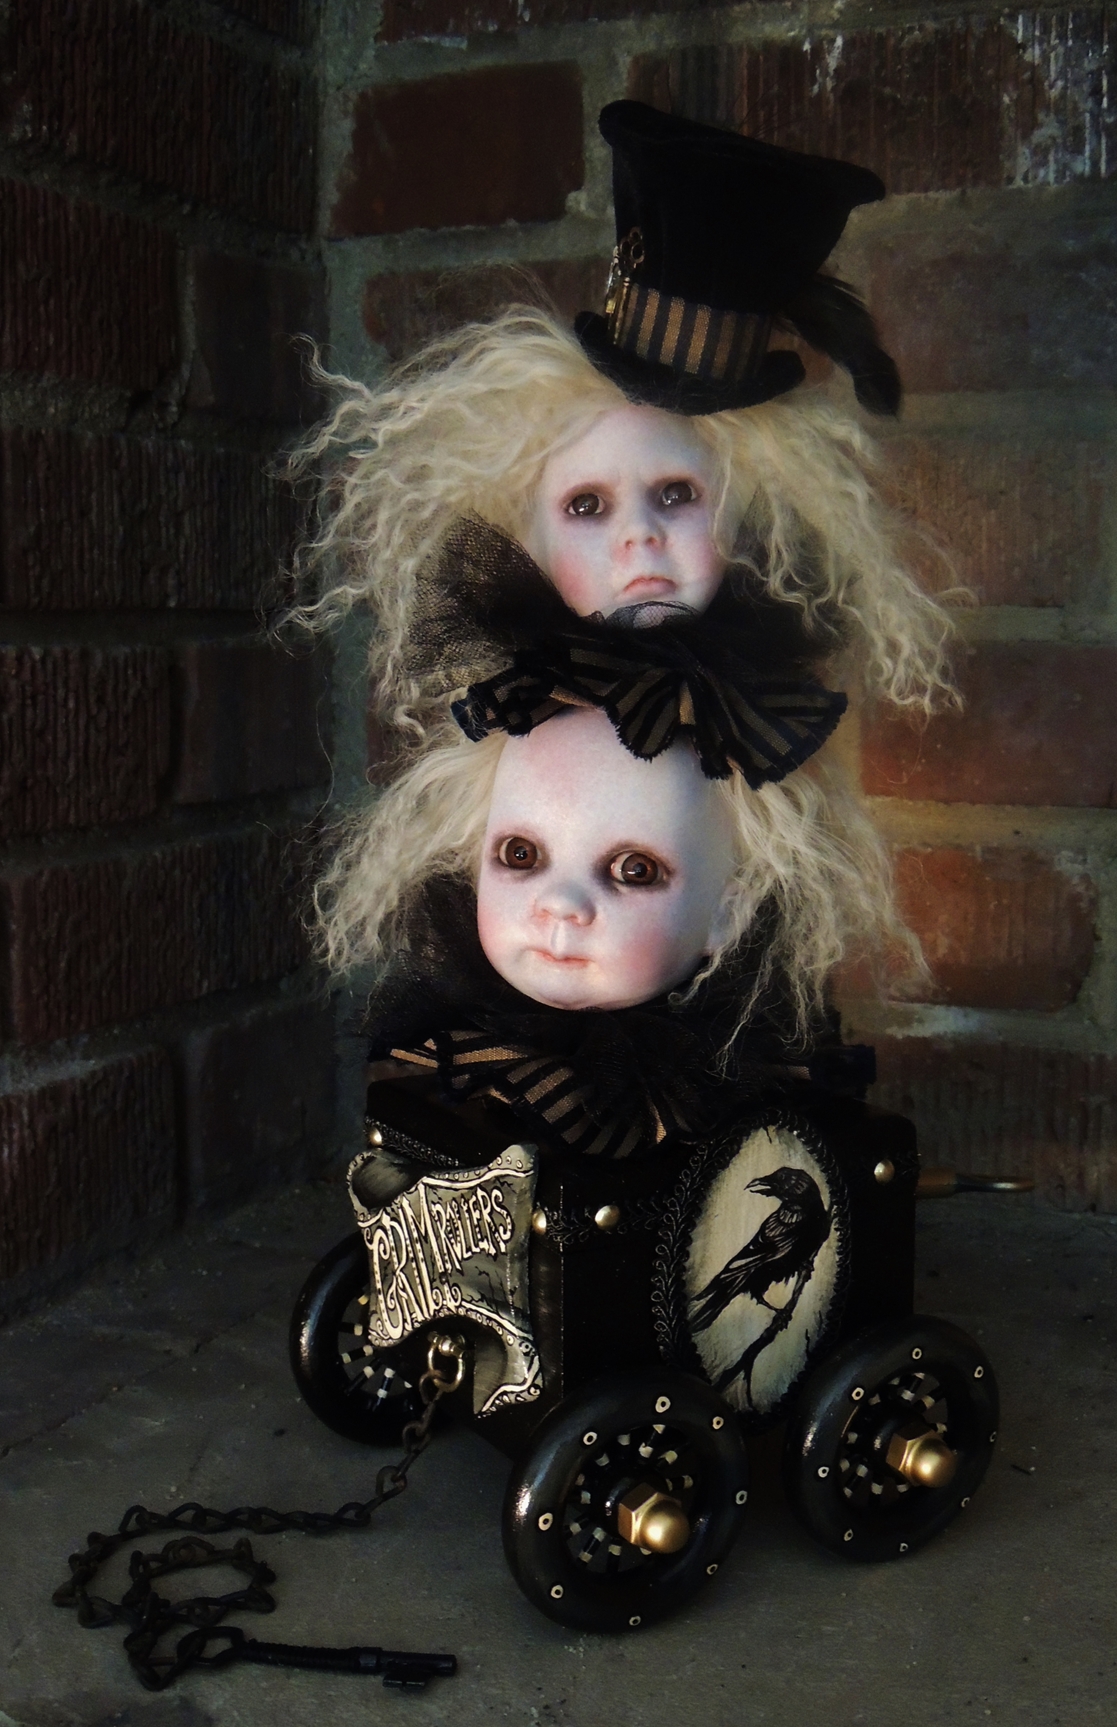 rolling pull-cart toy with a raven painted on the side and two gothic repainted doll heads with wild blond hair inspired by the works of the Brothers Grimm.